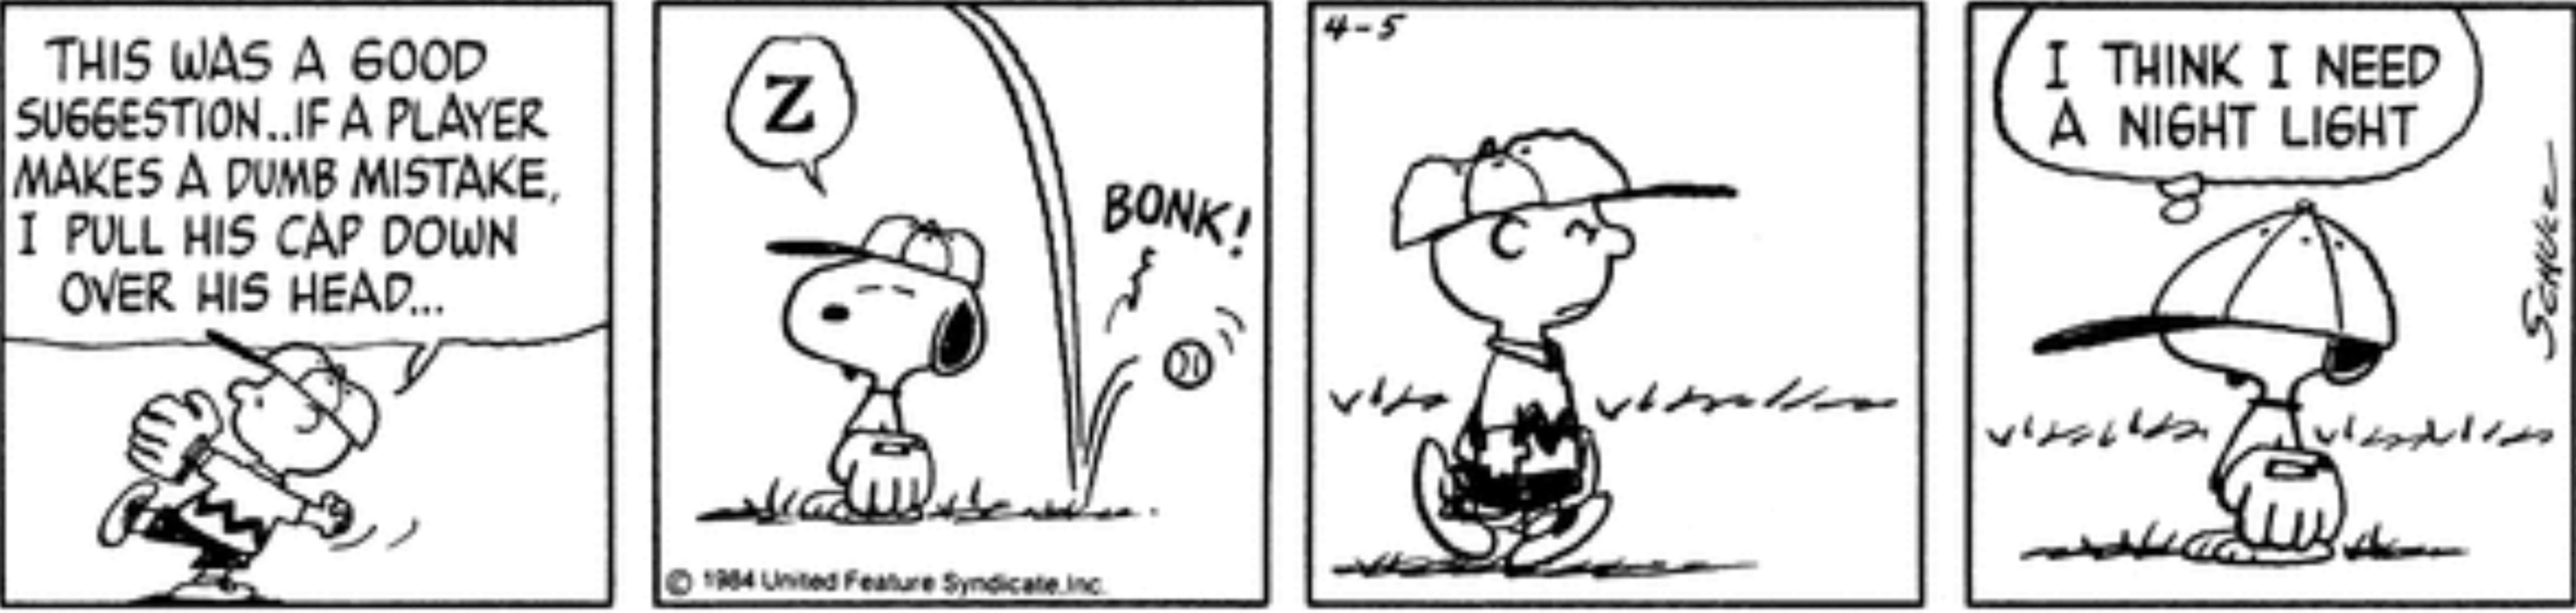 Snoopy getting hit on the head with a baseball in Peanuts.